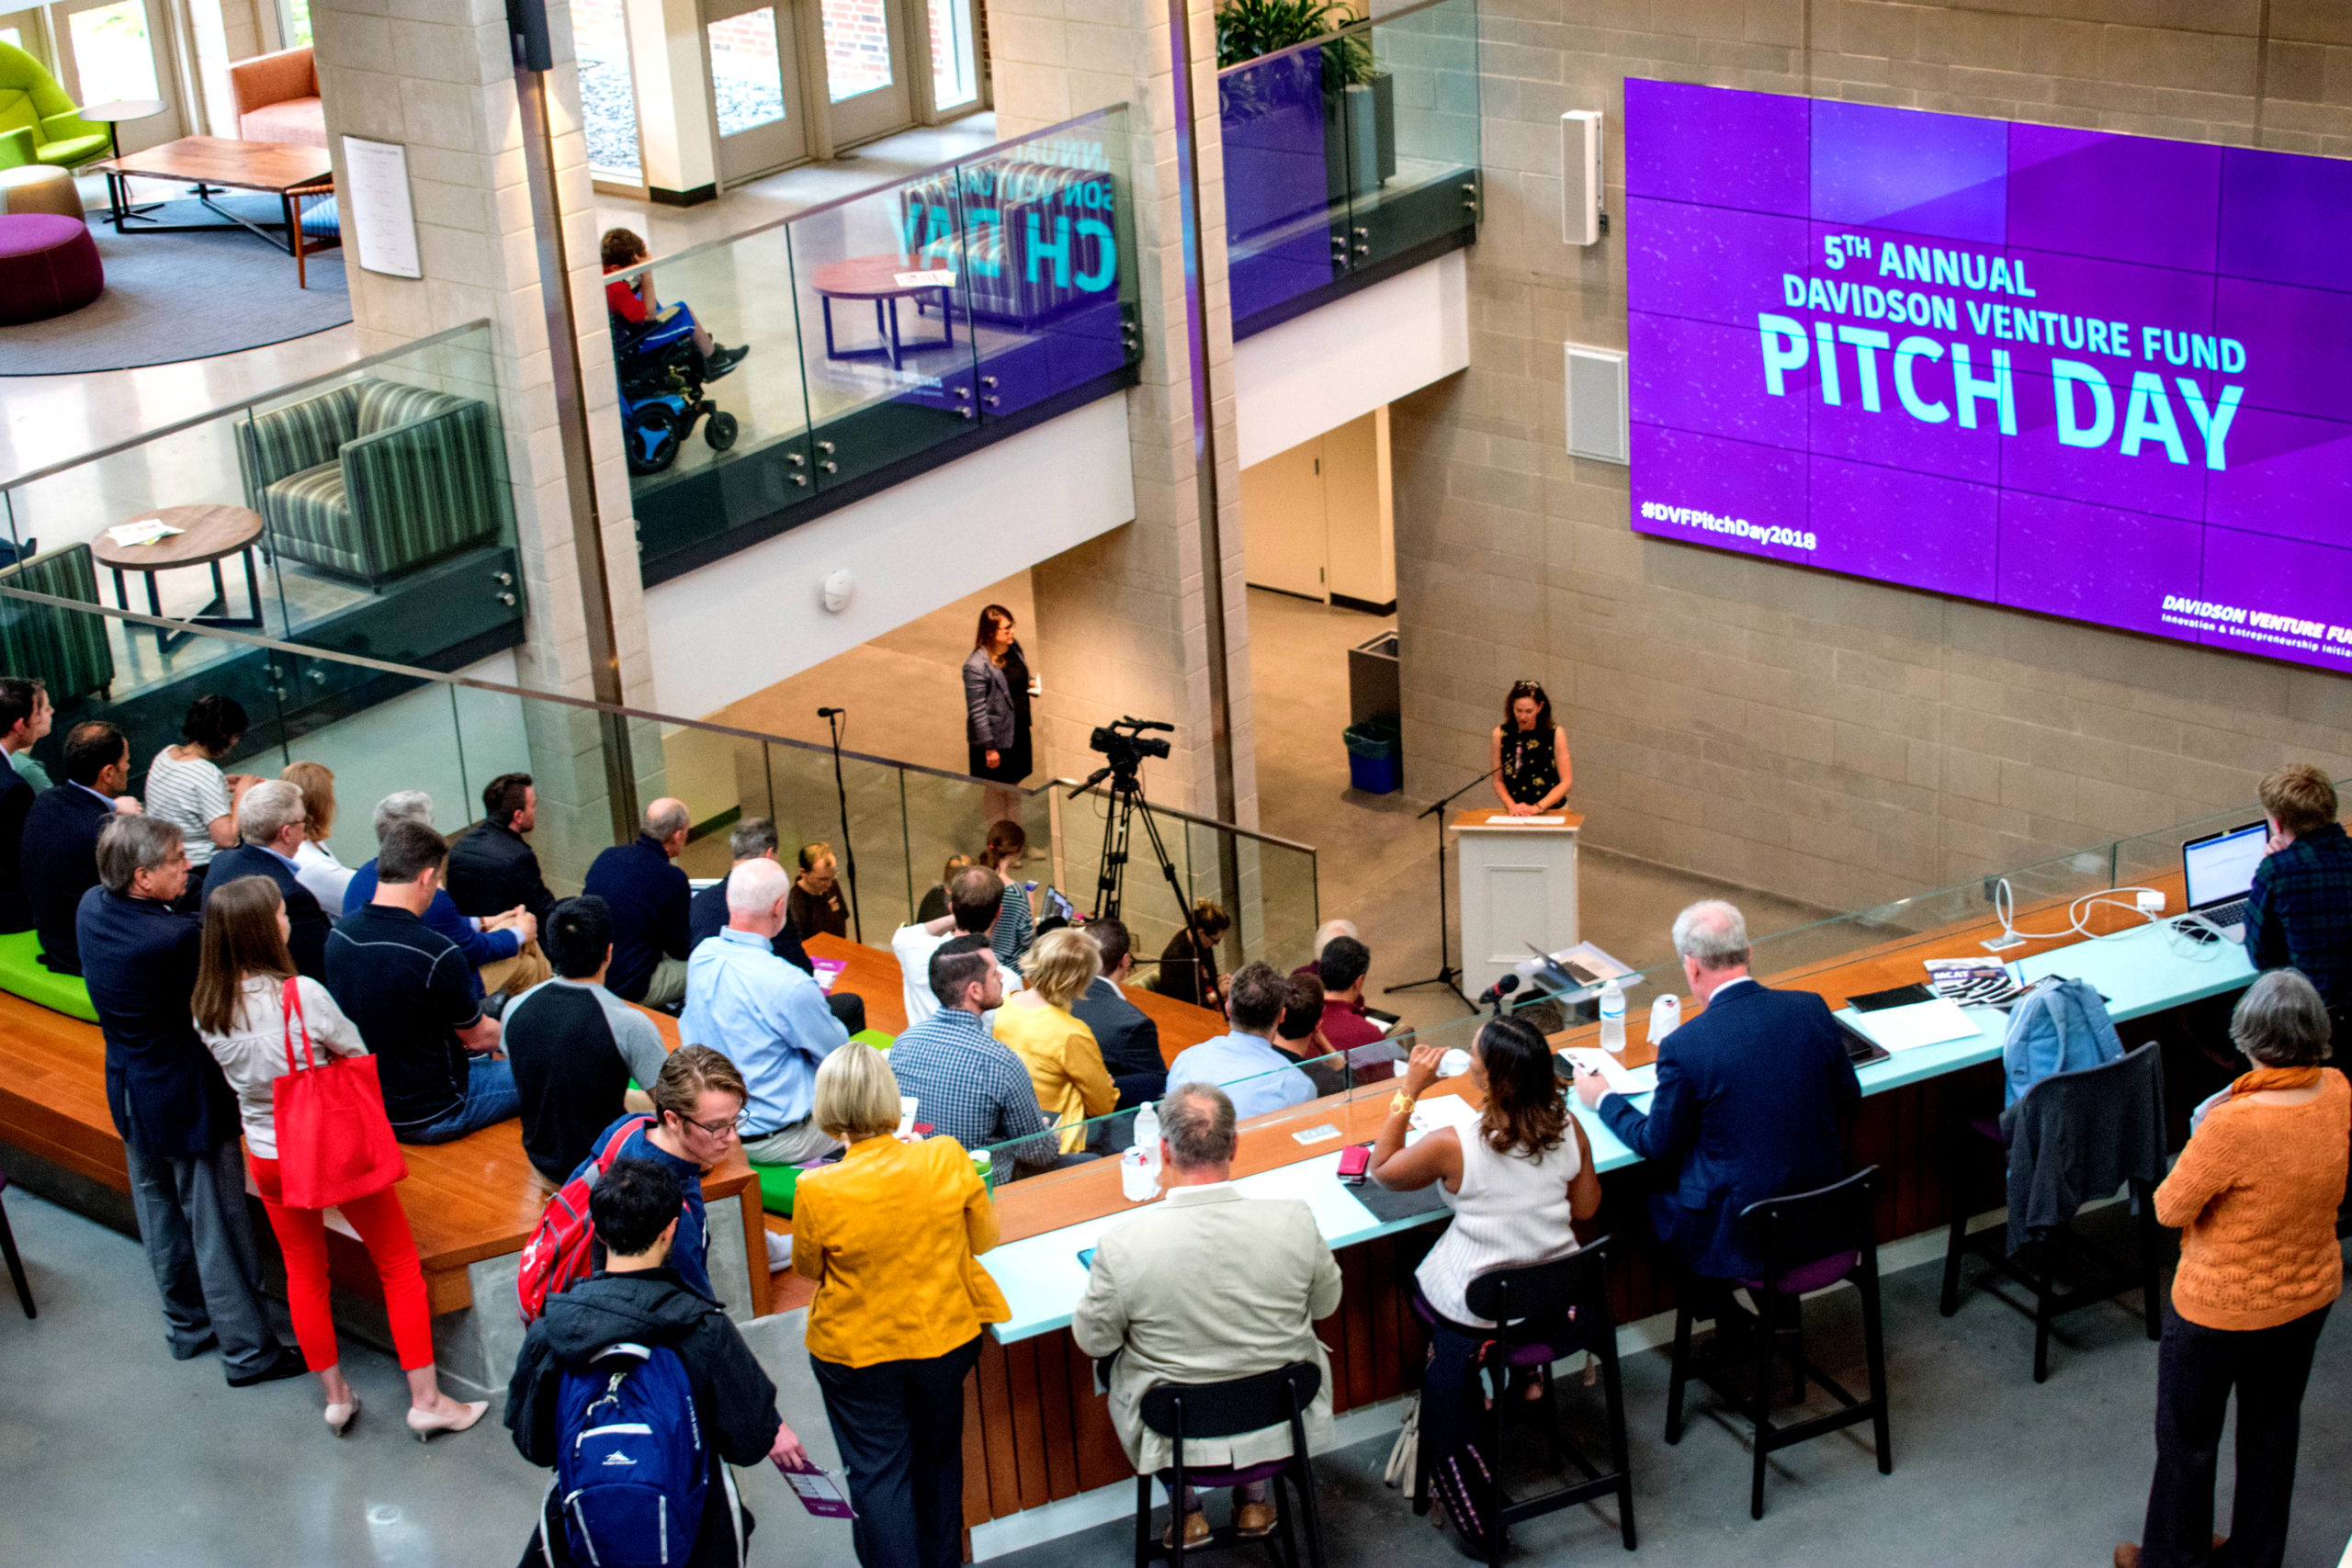 Carol Quillen speaks at the 5th annual Davidson Venture Fund Pitch Day in front of an audience in the Wall gallery